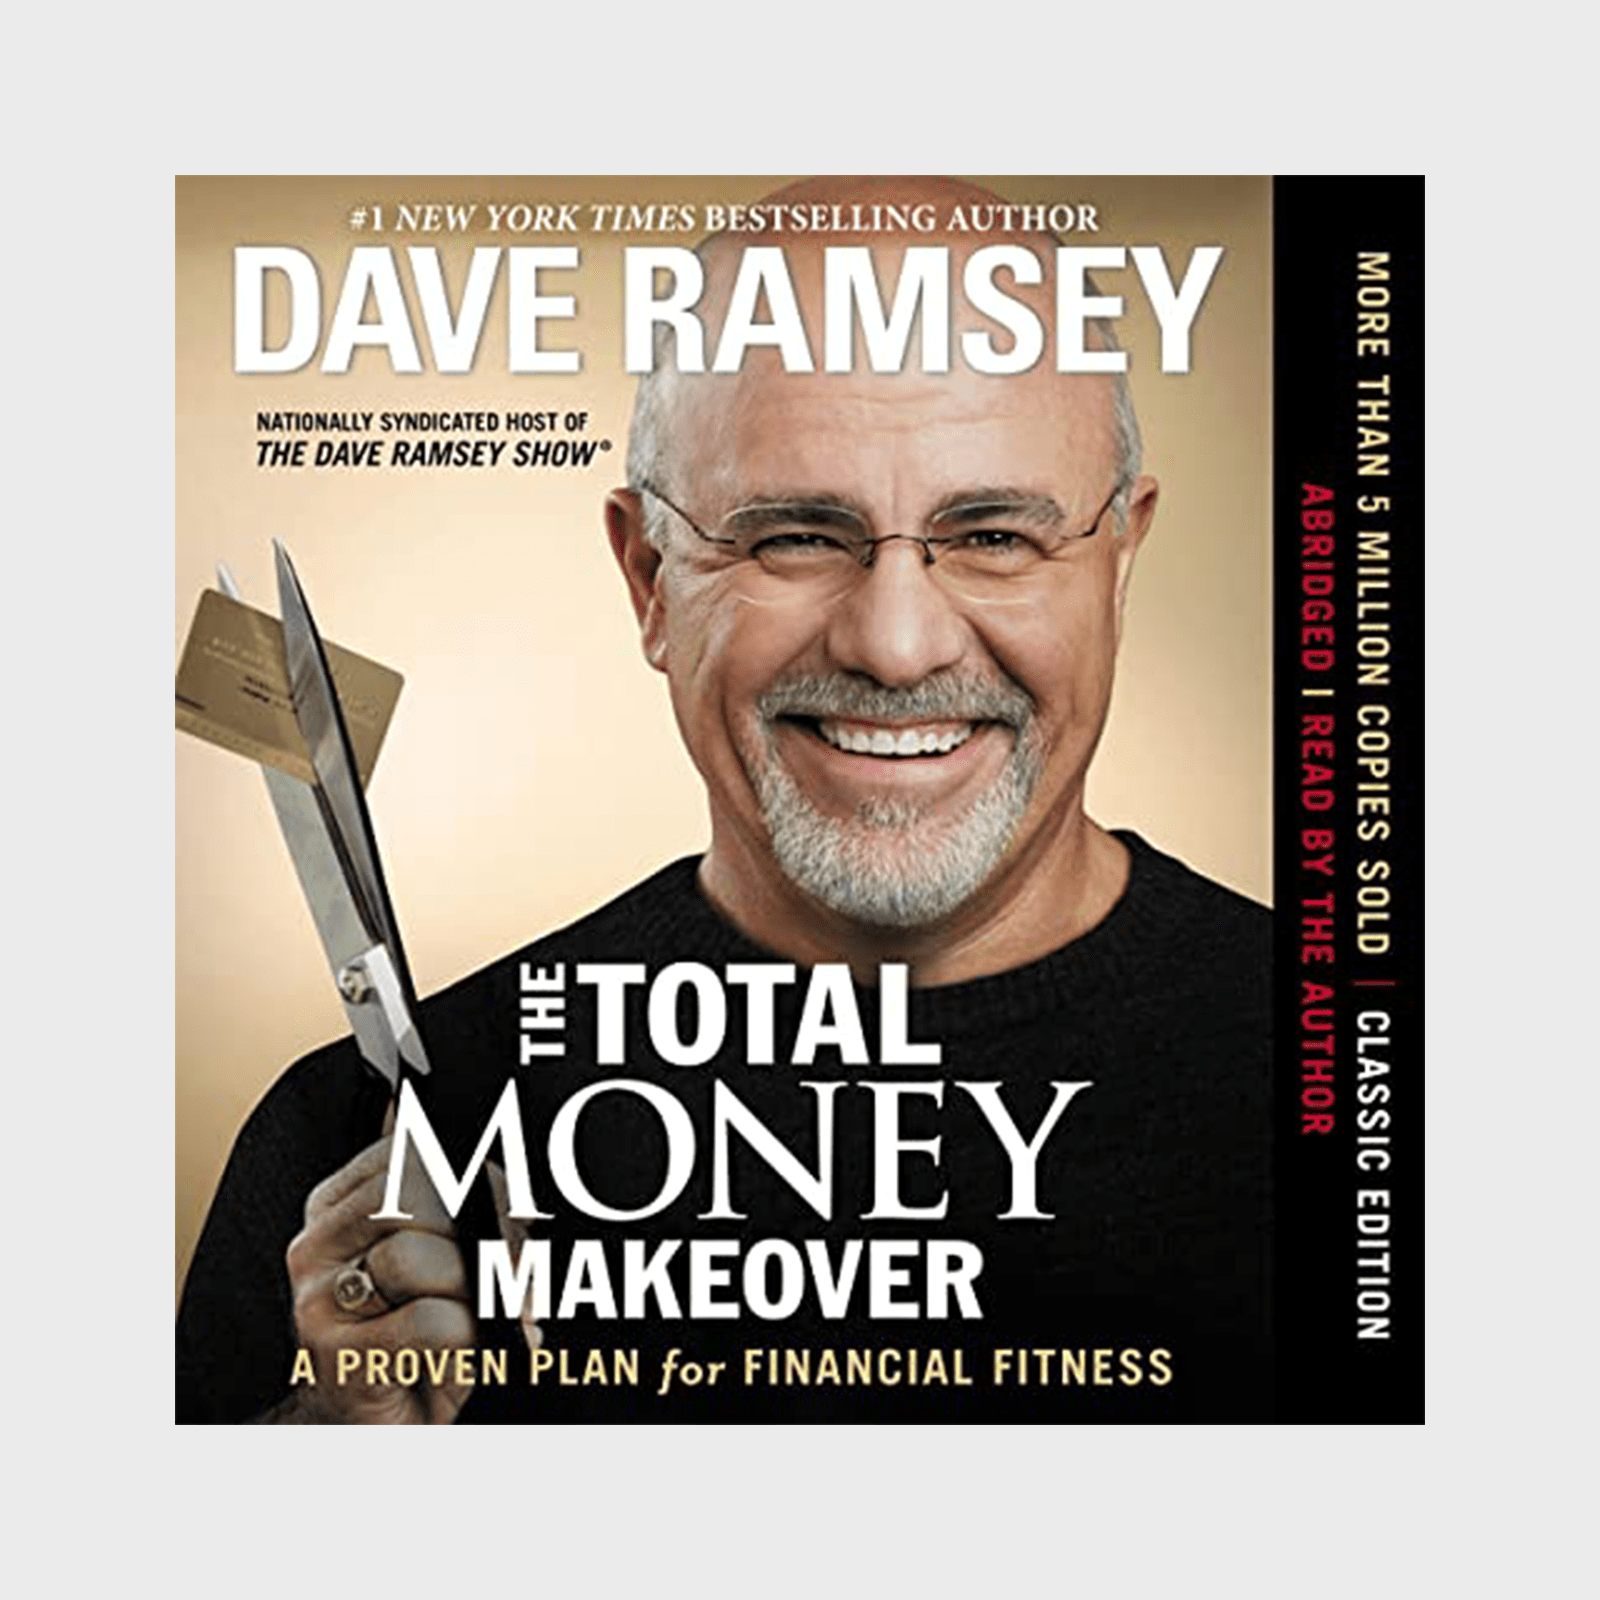 <h3><strong><em>The Total Money Makeover</em> by Dave Ramsey</strong></h3> <p>Ready to stop living paycheck to paycheck? Finance guru Dave Ramsey's <a href="https://www.amazon.com/The-Total-Money-Makeover-audiobook/dp/B0845YKM1P/" rel="noopener noreferrer"><em>Total Money Makeover</em></a> offers simple yet effective strategies, also known as the baby steps, that will allow you to take control of your finances and ultimately achieve financial freedom. Could it be one of the <a href="https://www.rd.com/list/self-made-millionaires-favorite-books/" rel="noopener noreferrer">books that make you rich</a>? Maybe!</p> <p class="listicle-page__cta-button-shop"><a class="shop-btn" href="https://www.amazon.com/The-Total-Money-Makeover-audiobook/dp/B0845YKM1P/">Shop Now</a></p>